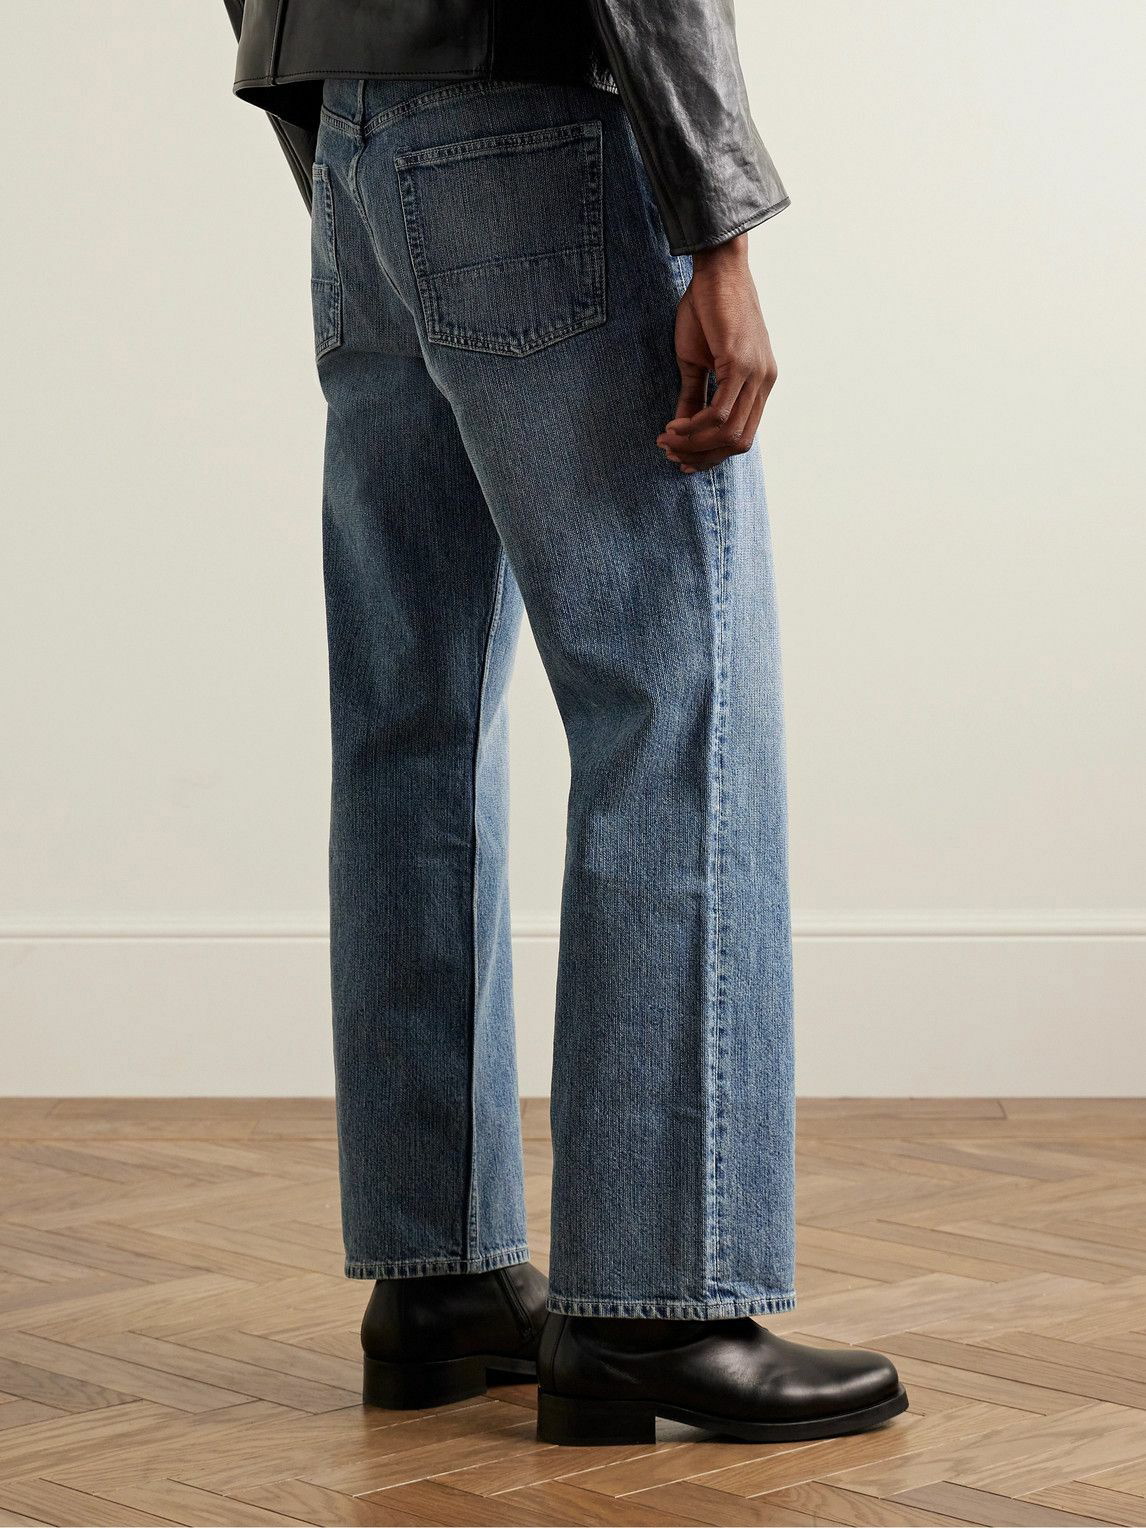 Third Cut wide-leg jeans in blue - Our Legacy